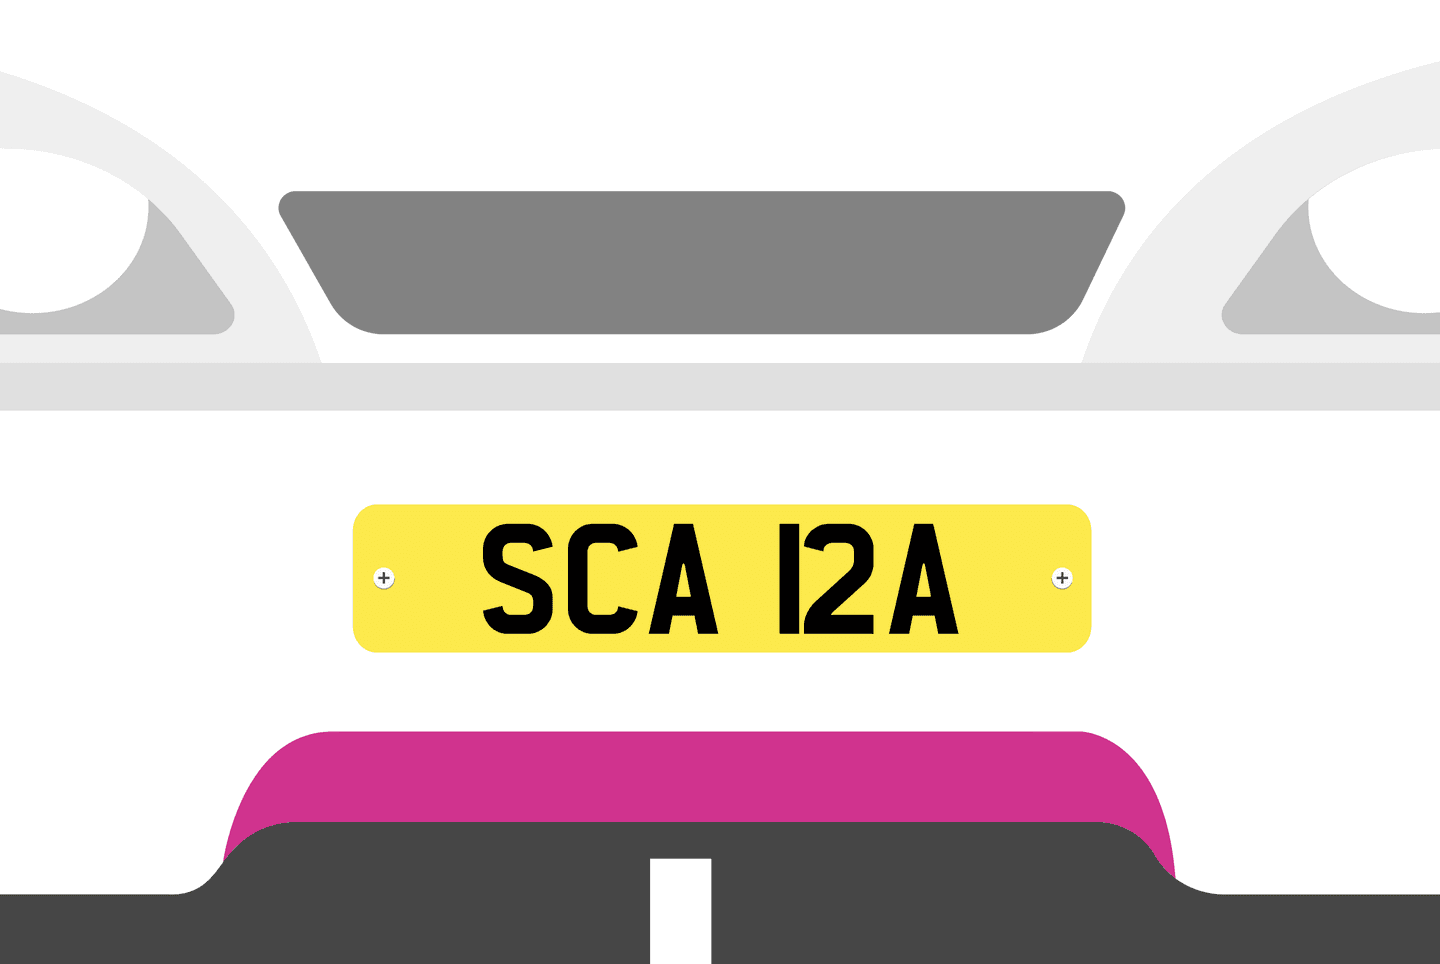 An illustration of personalised license plate spelling Scara